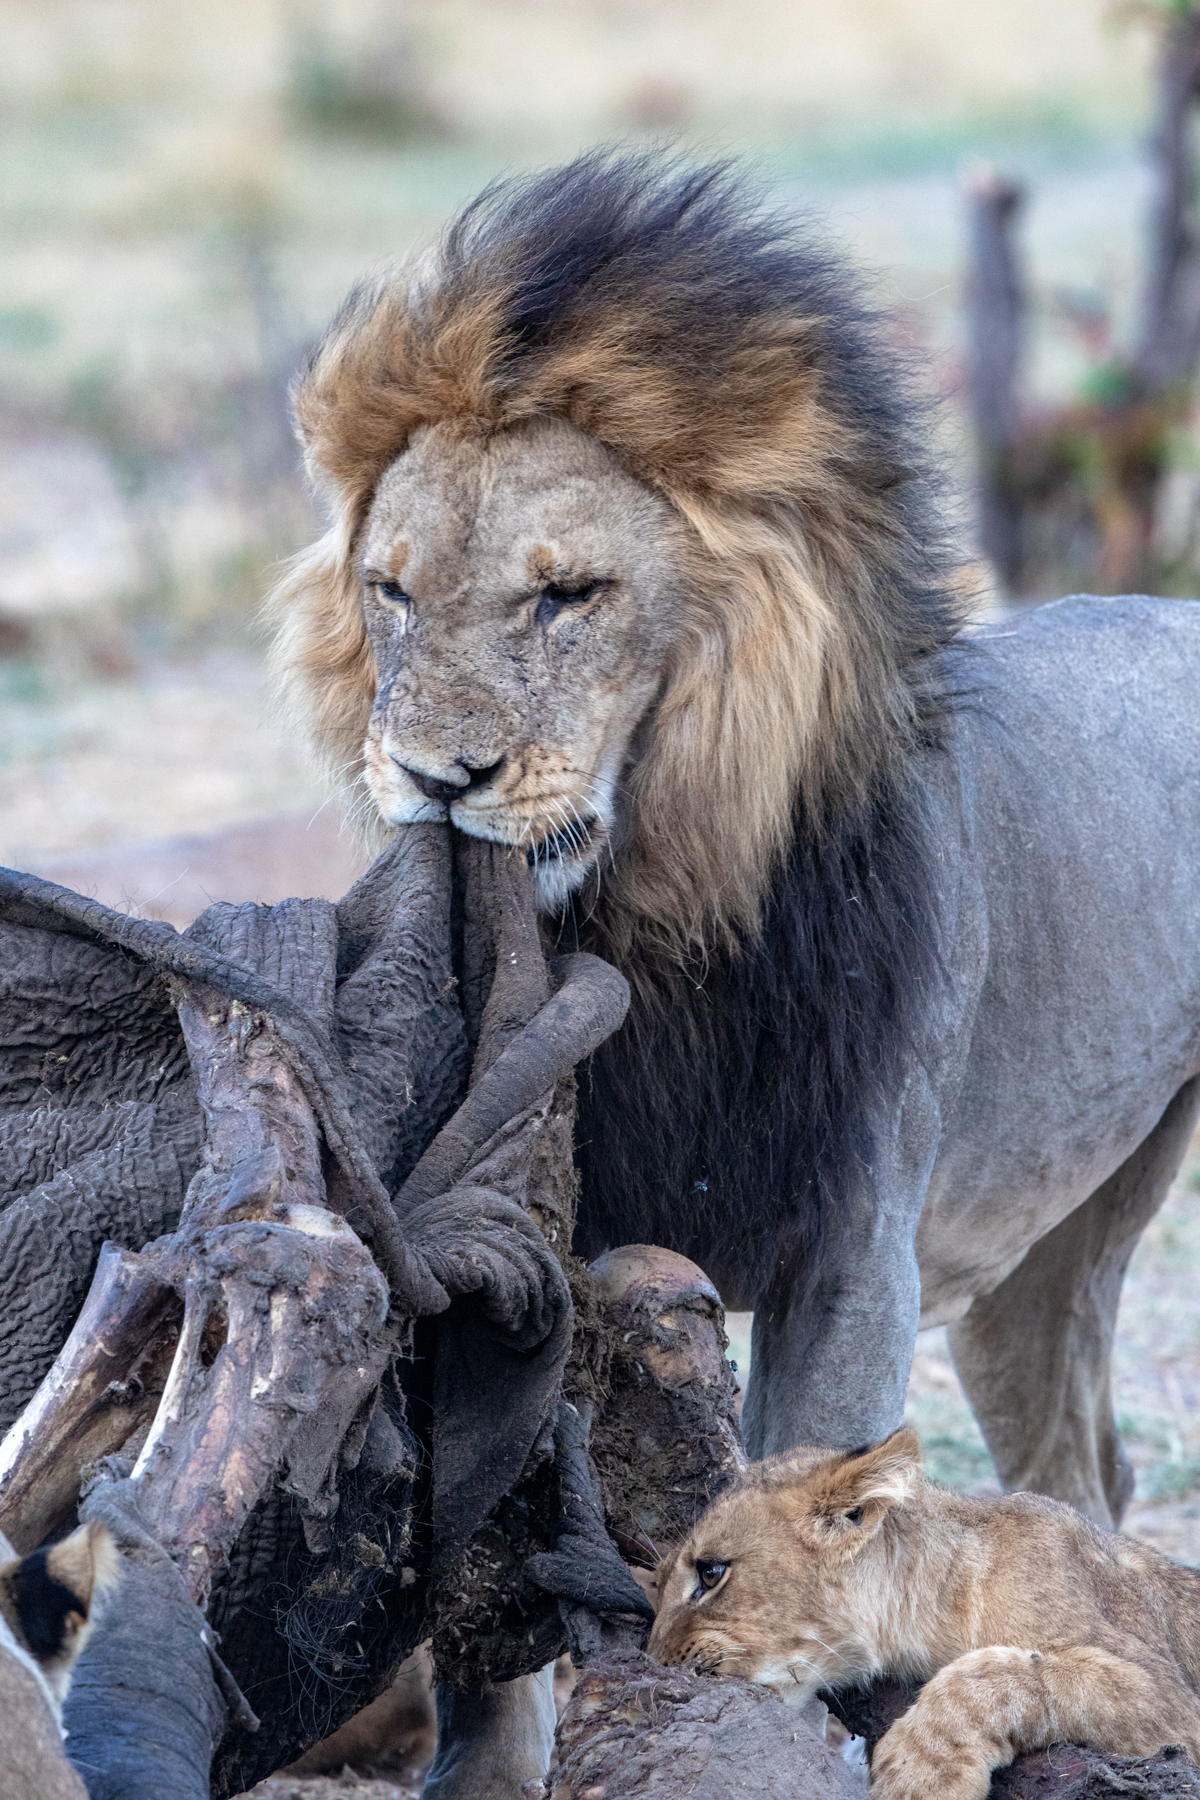 A male Lion from the Marsh Pride drags the almost-consumed carcass of a young elephant at Savuti, Botswana